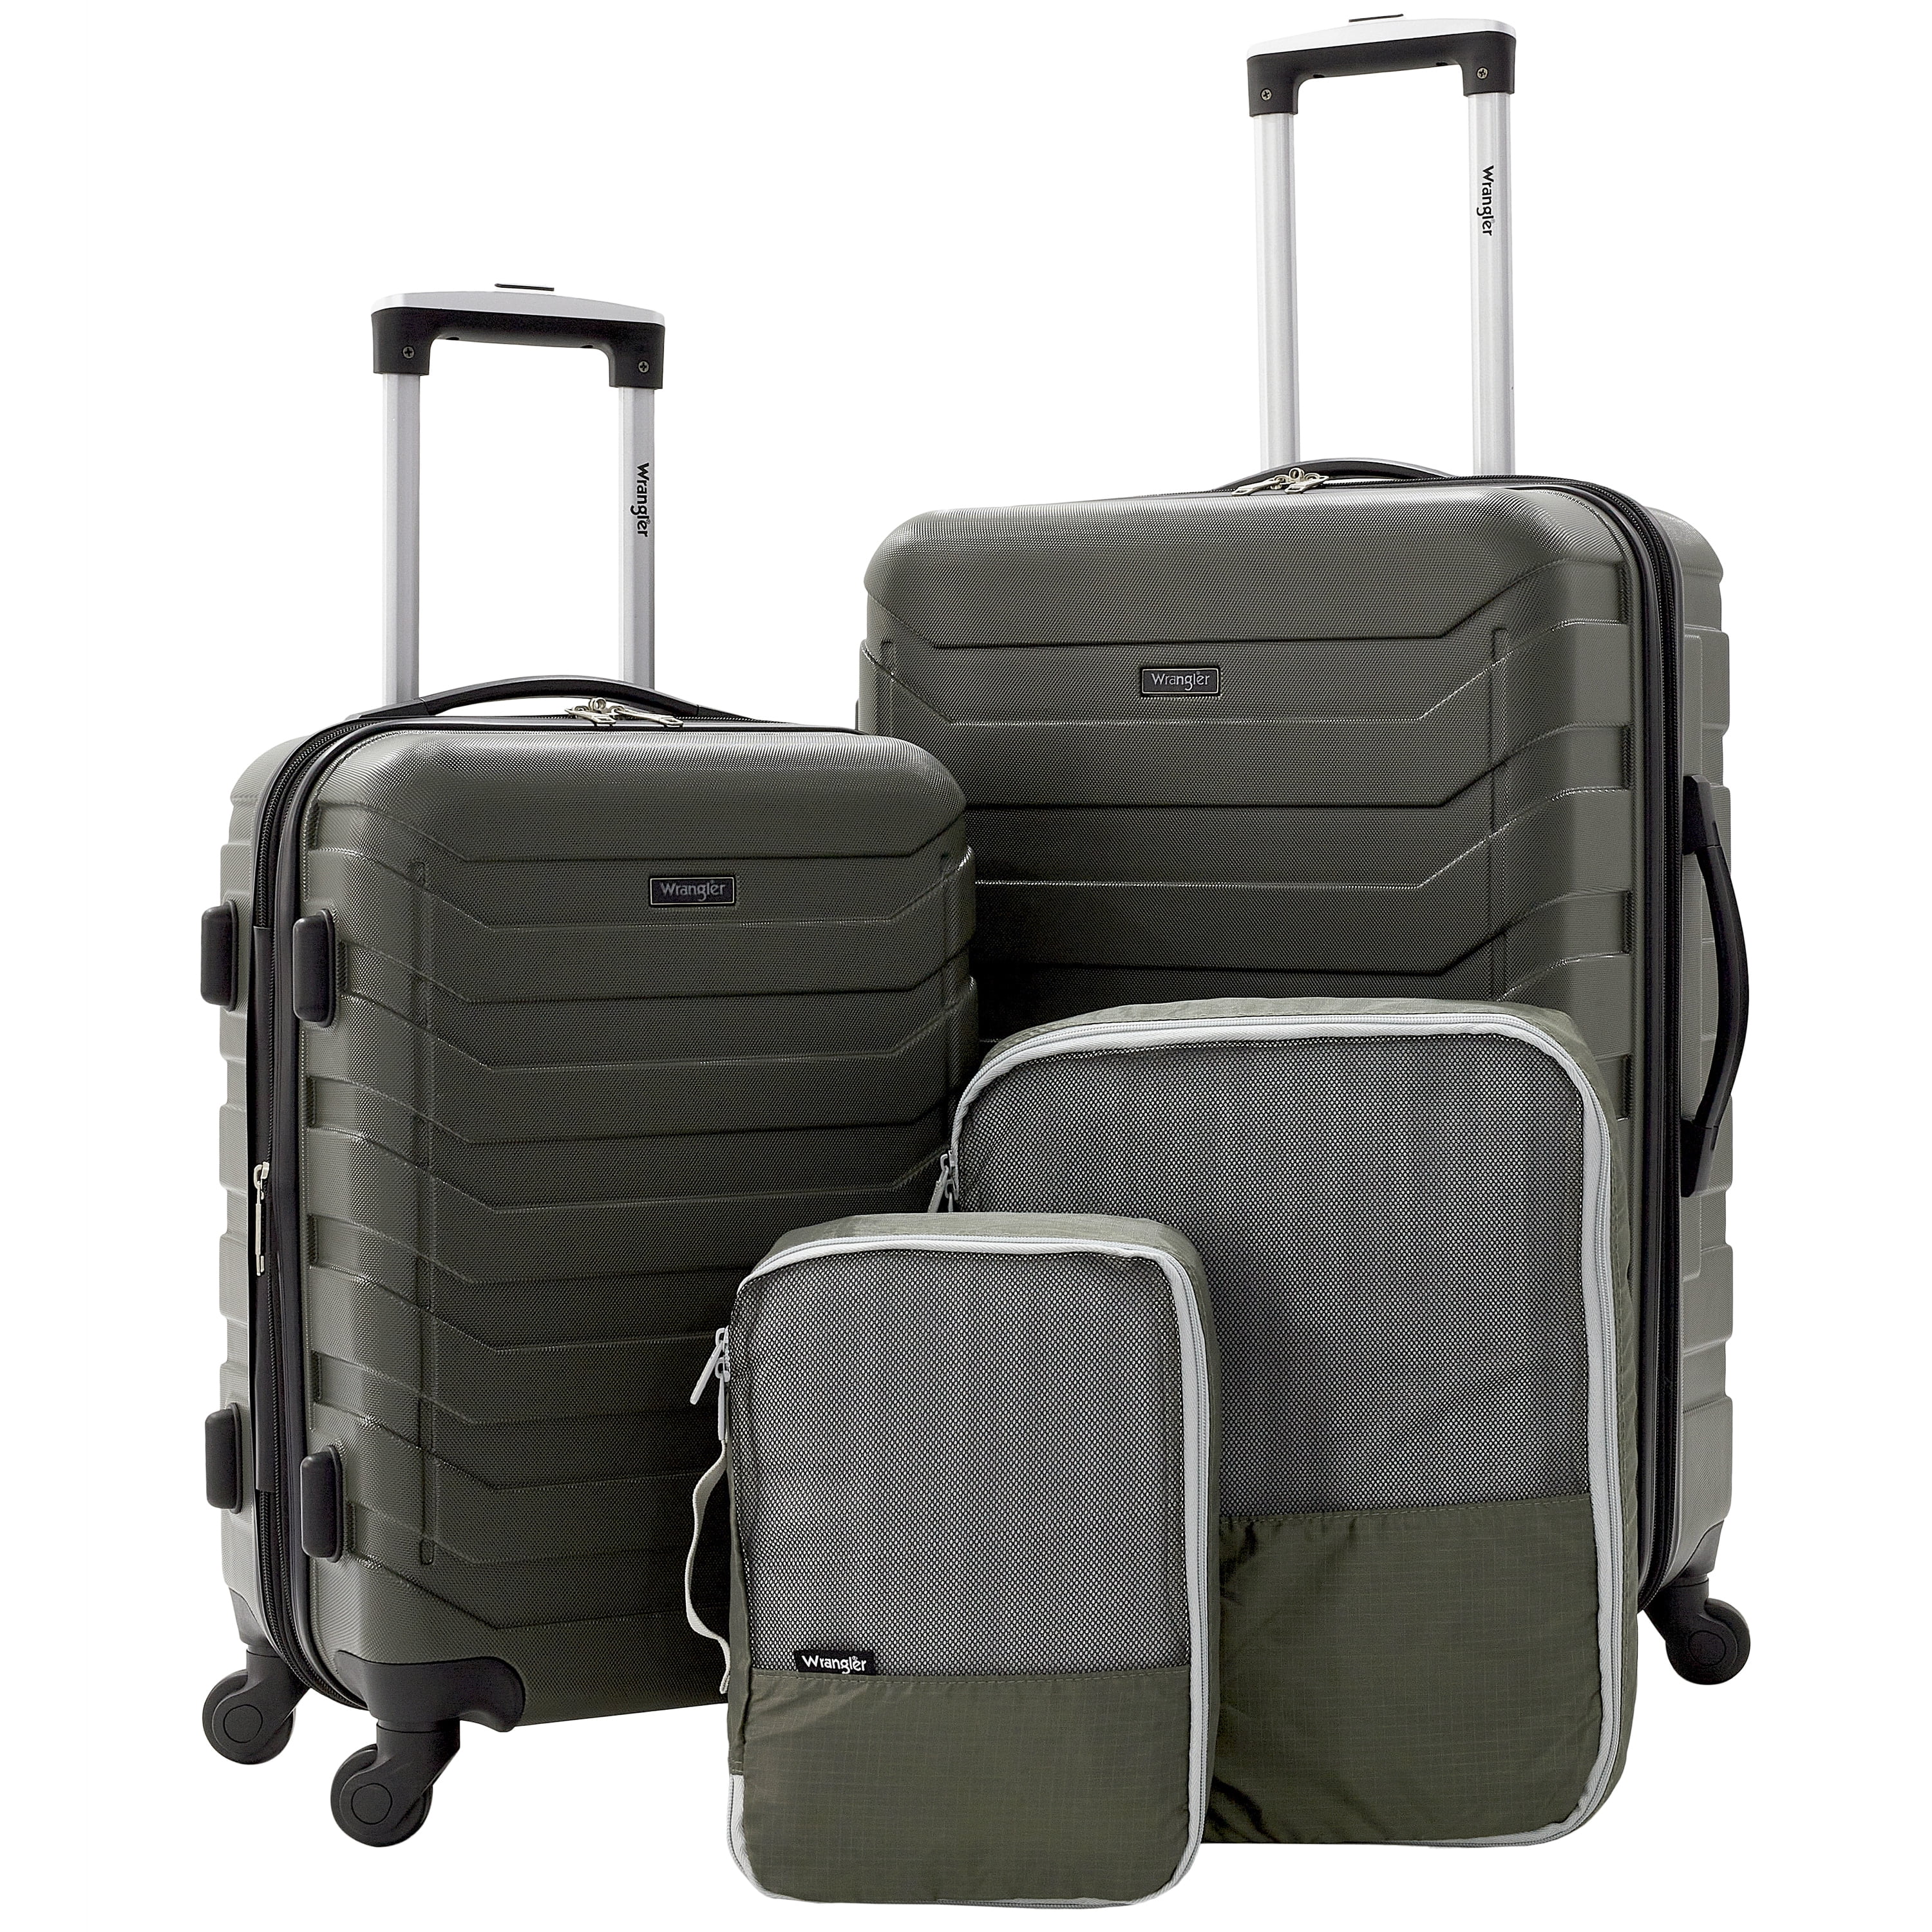 BEOW Luggage Sets 4-Piece (16/20/24/28) Expandable Suitcases with